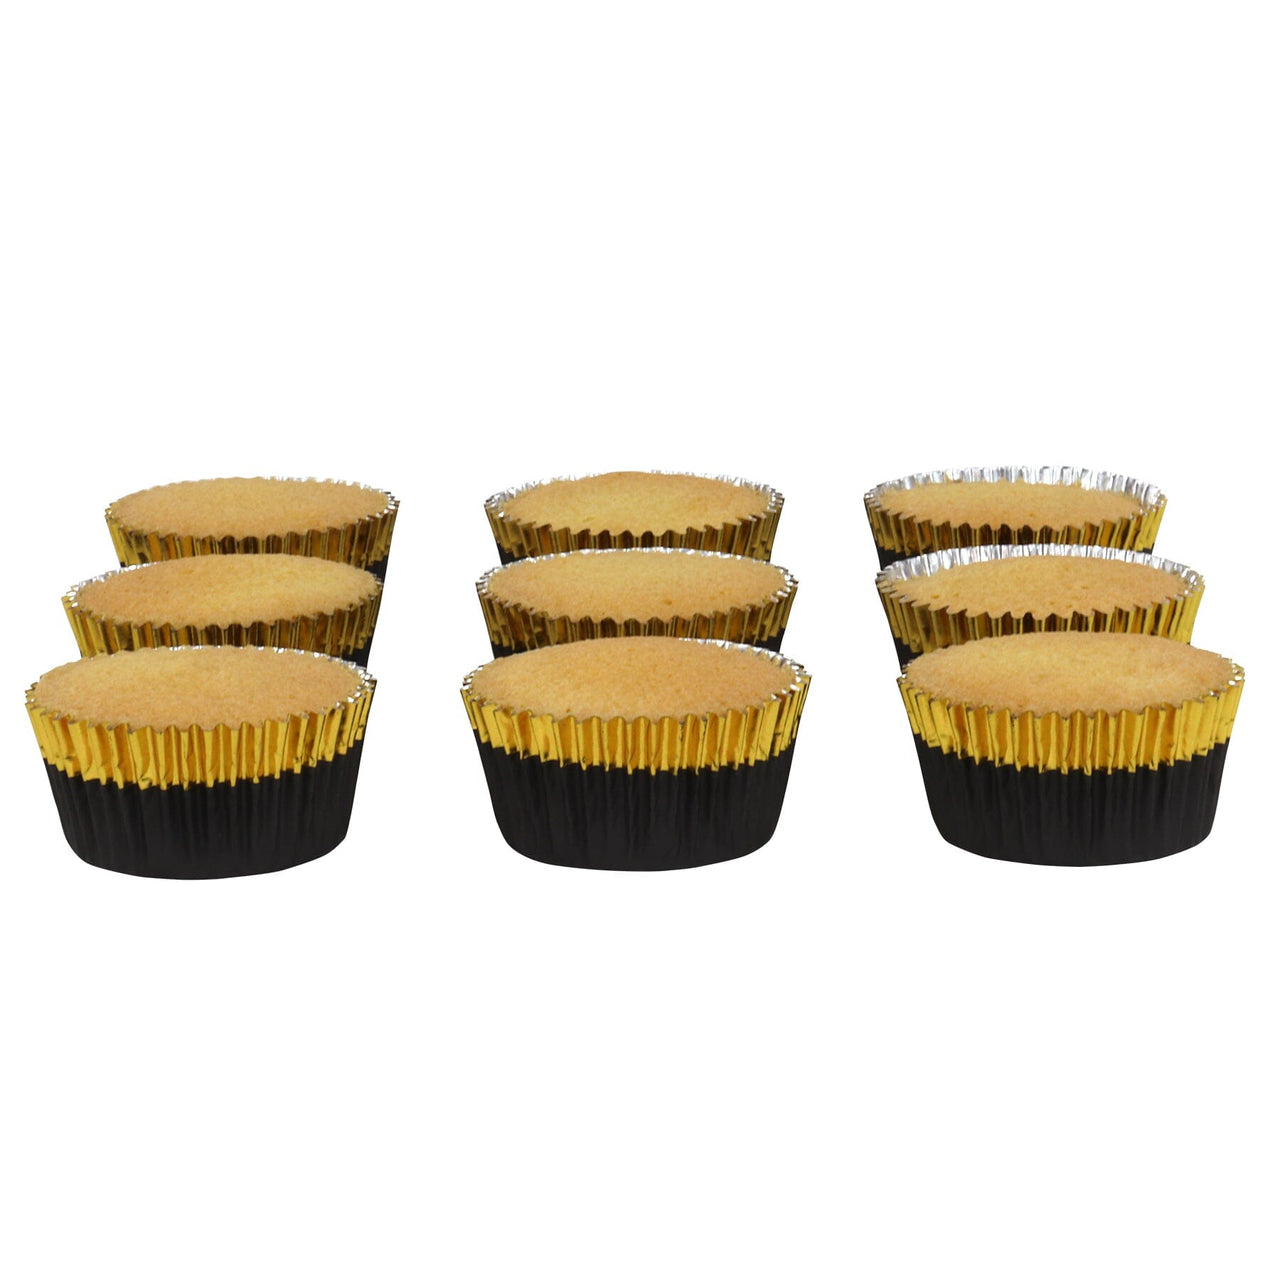 Cupcake Cases - Black with Gold Trim - 30 Pack Cupcake Cases PME 